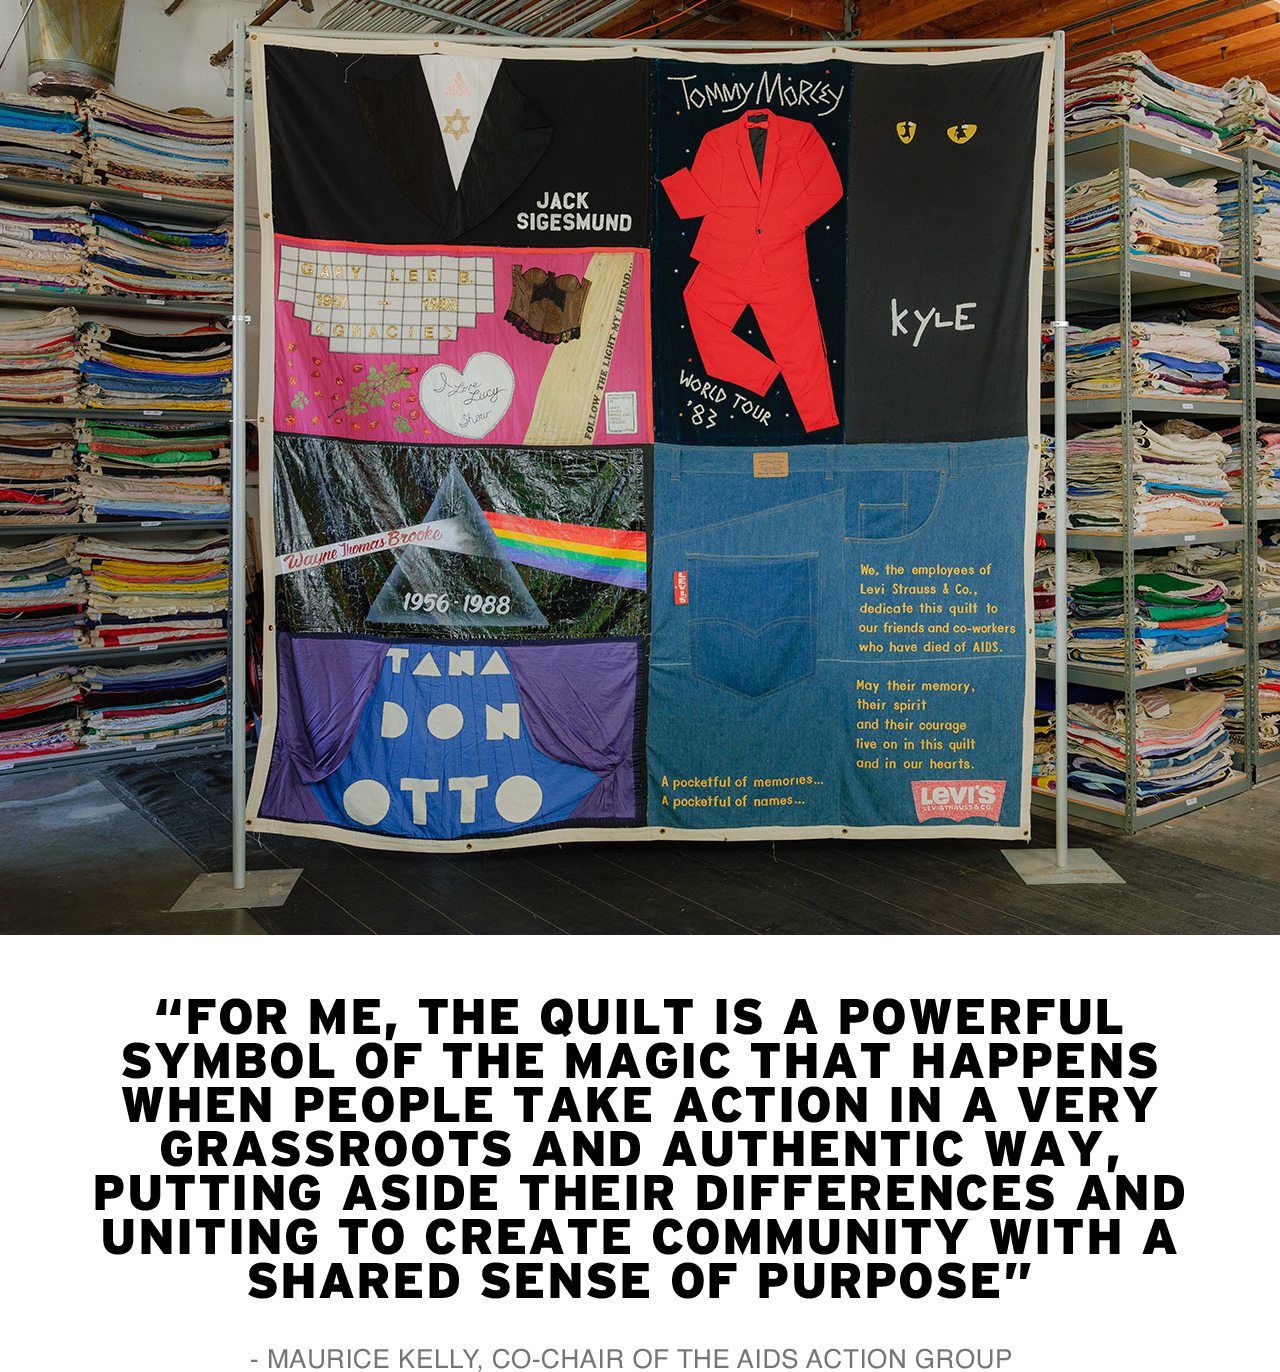 ...THE QUILT IS A POWERFUL SYMBOL OF THE MAGIC THAT HAPPENS WHEN PEOPLE TAKE ACTION IN ... AN AUTHENTIC WAY.